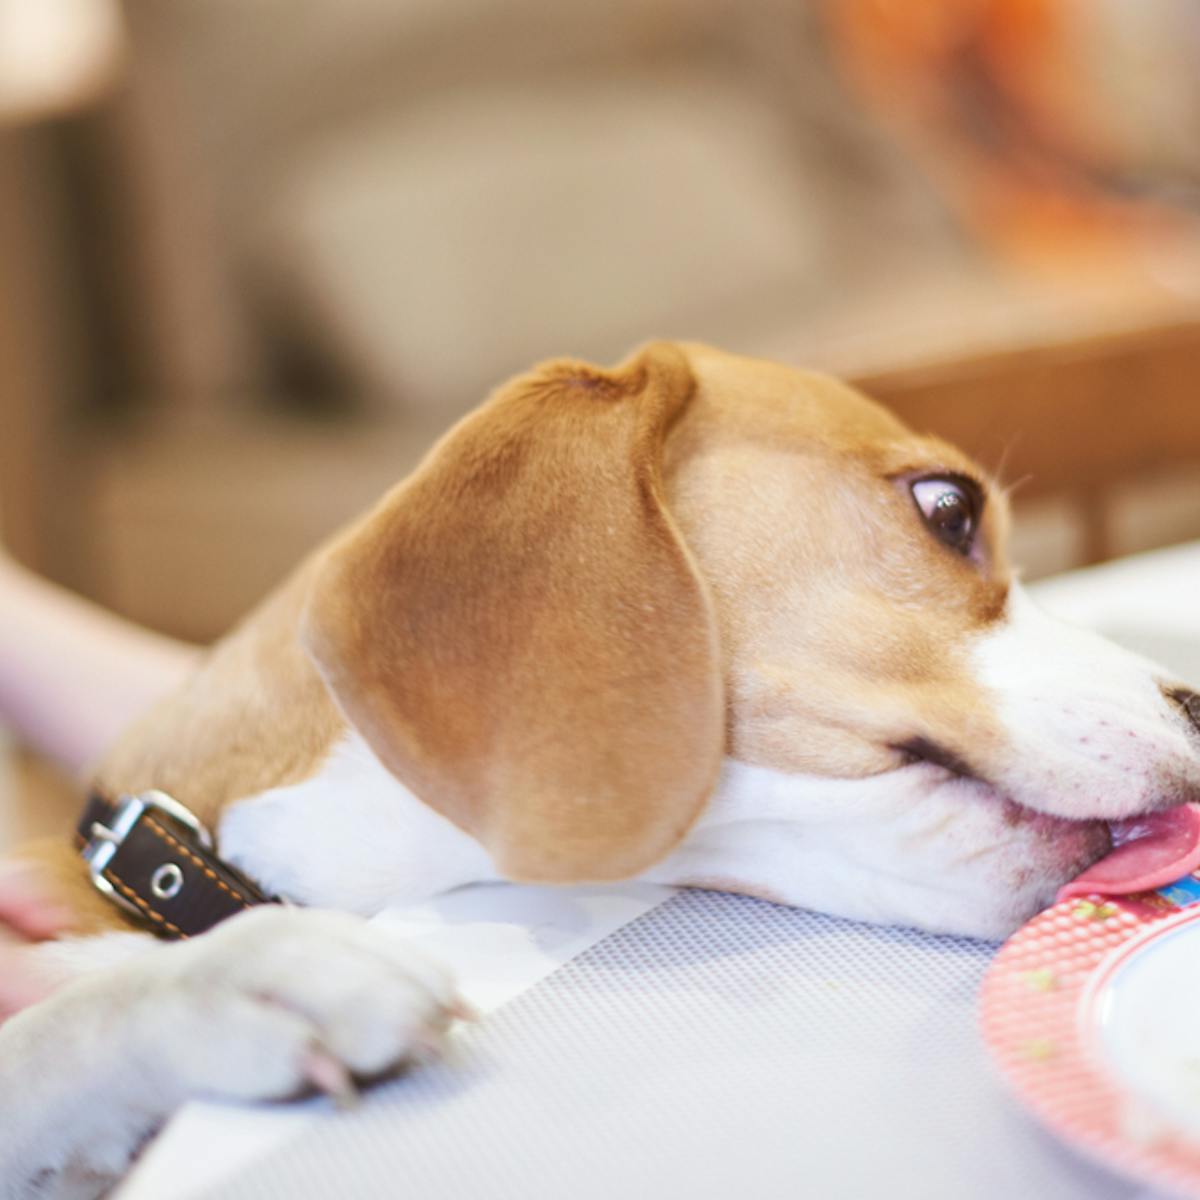 8 things we do that really confuse our dogs